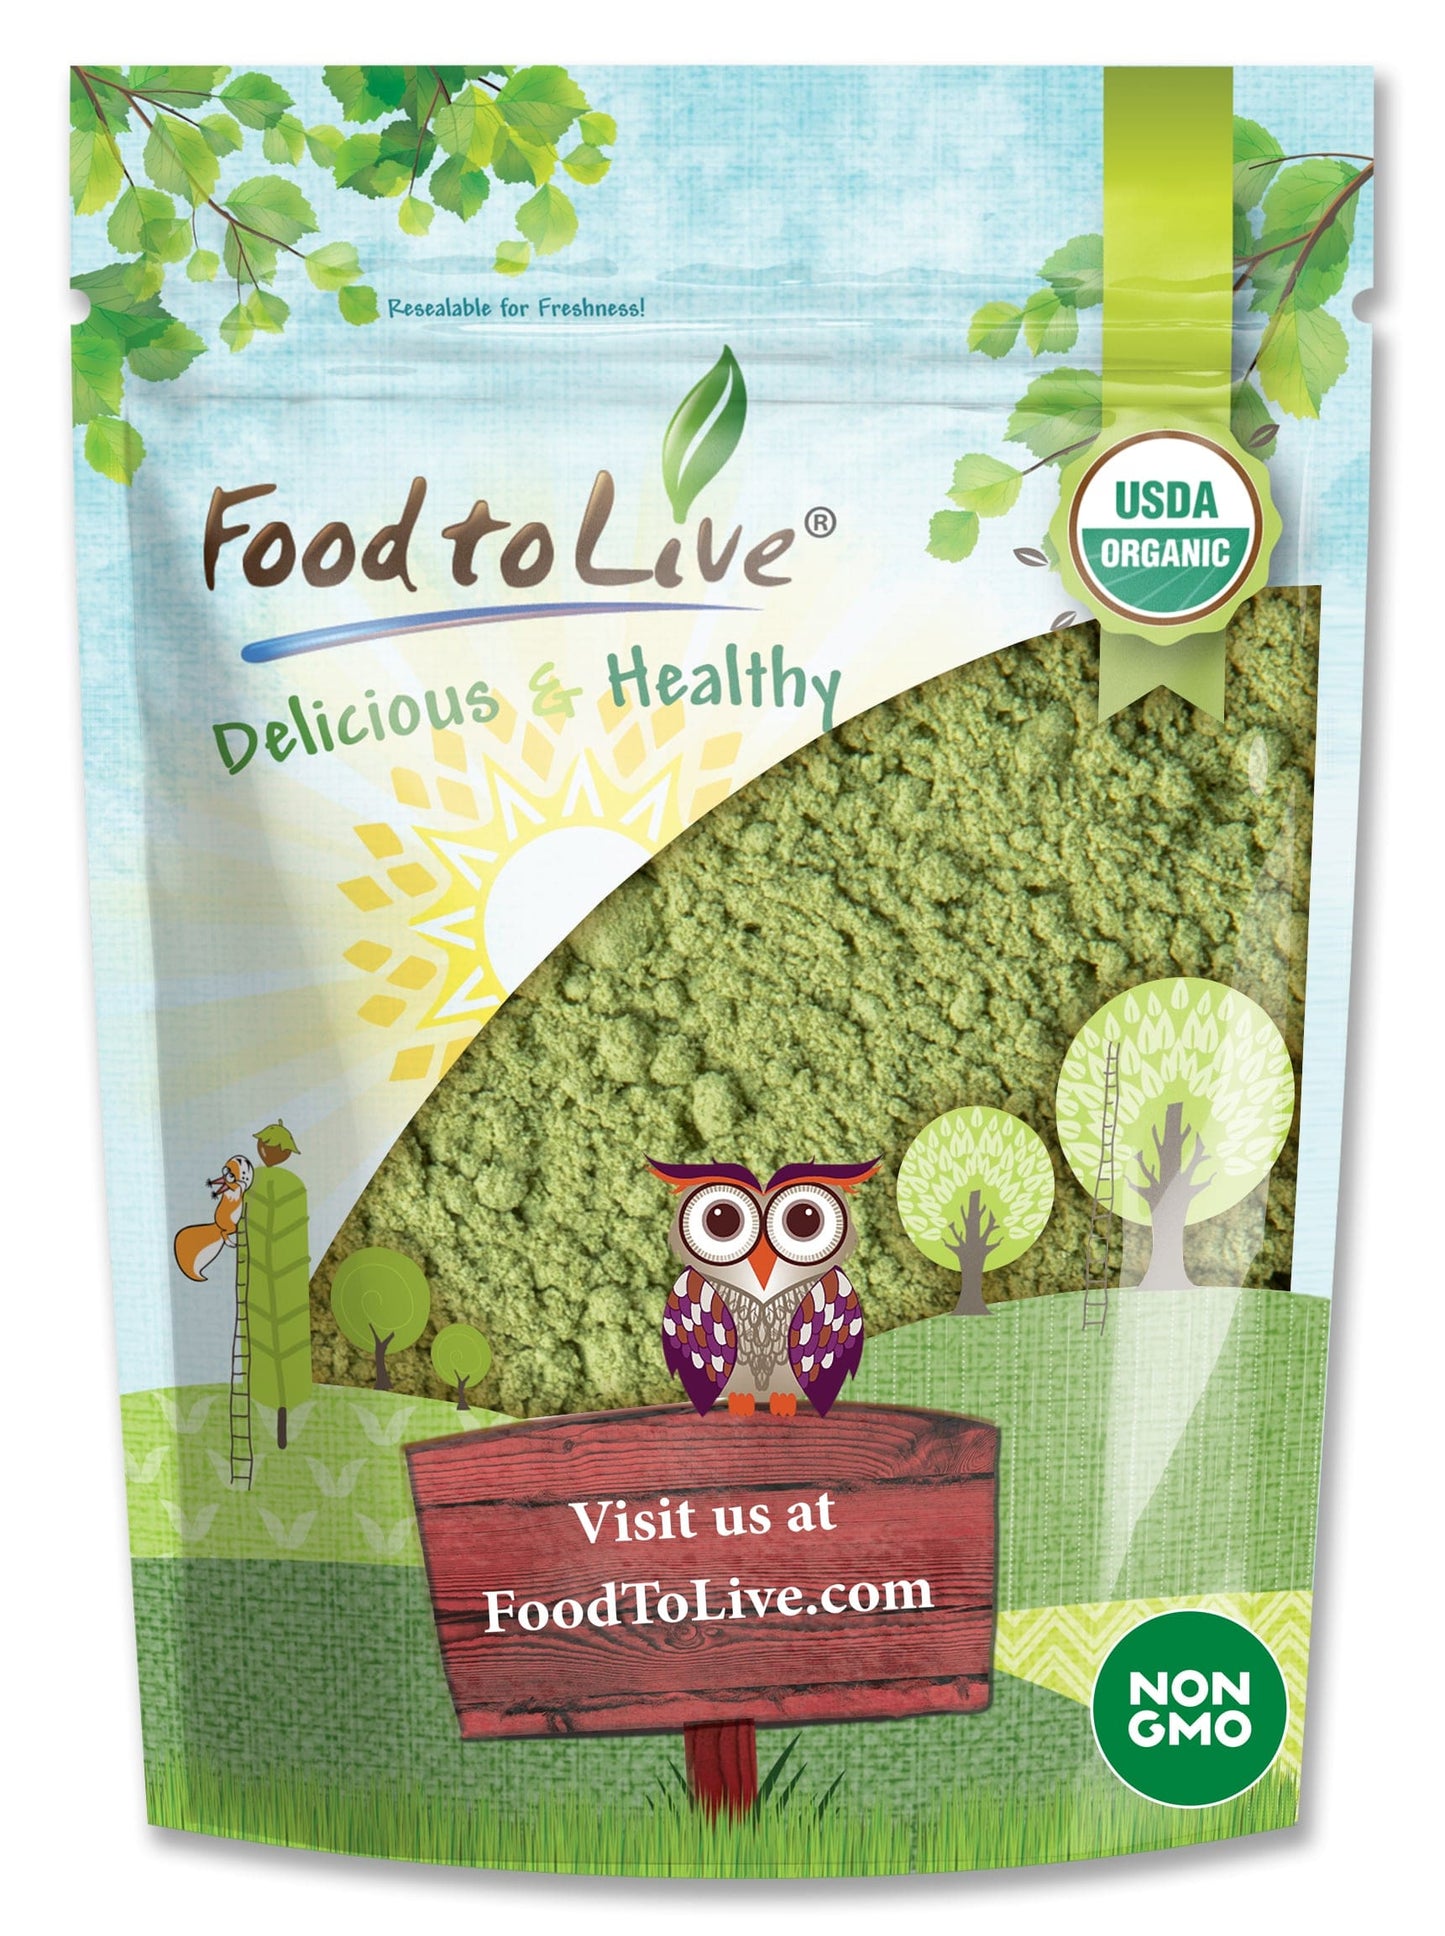 Organic Kale Powder — Non-GMO, Made from Raw Dried Whole Leaves, Vegan, Bulk, Great for Baking, Juices, Smoothies, Shakes, Теа, and Instant Breakfast Drinks. Good Source of Vitamin C